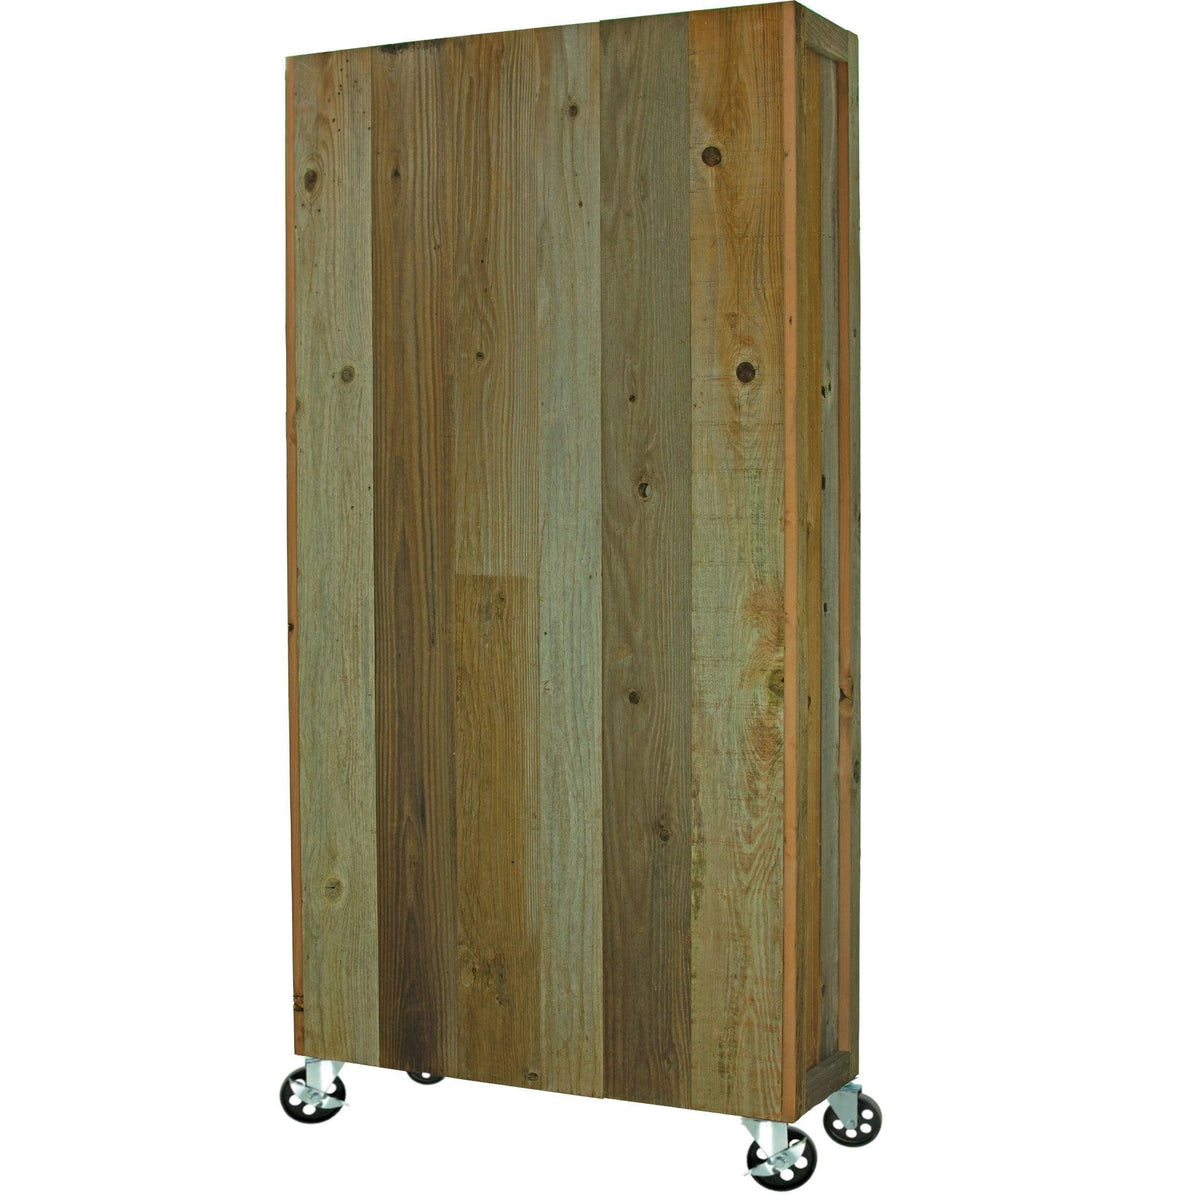 Back Side of Lee Display's brand new Outdoor Rolling Redwood Storage Cabinet with Wheels. Shelving Unit with 5in Galvanized Steel Casters on sale at leedisplay.com